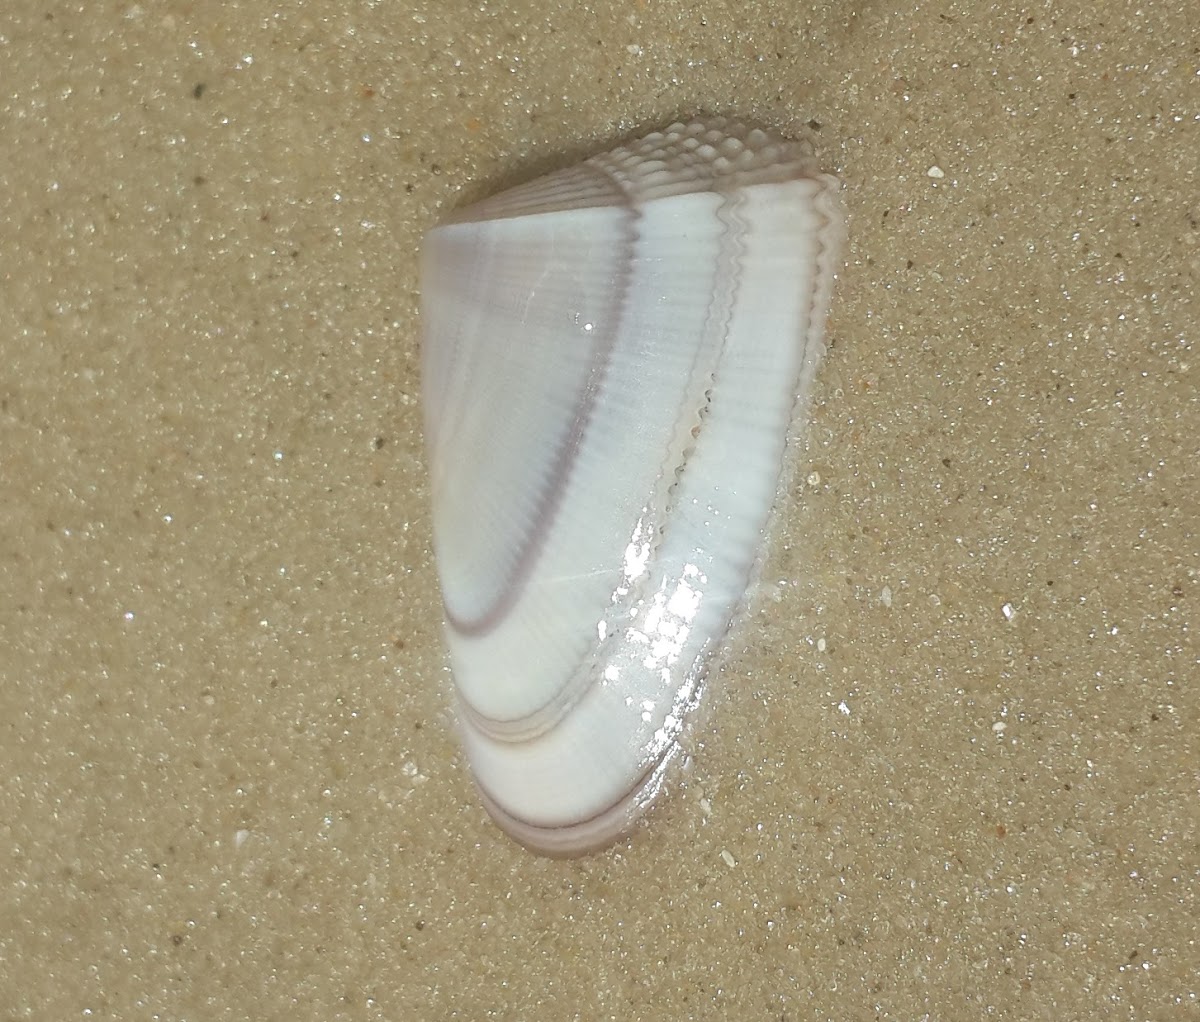 Wedge clam shell